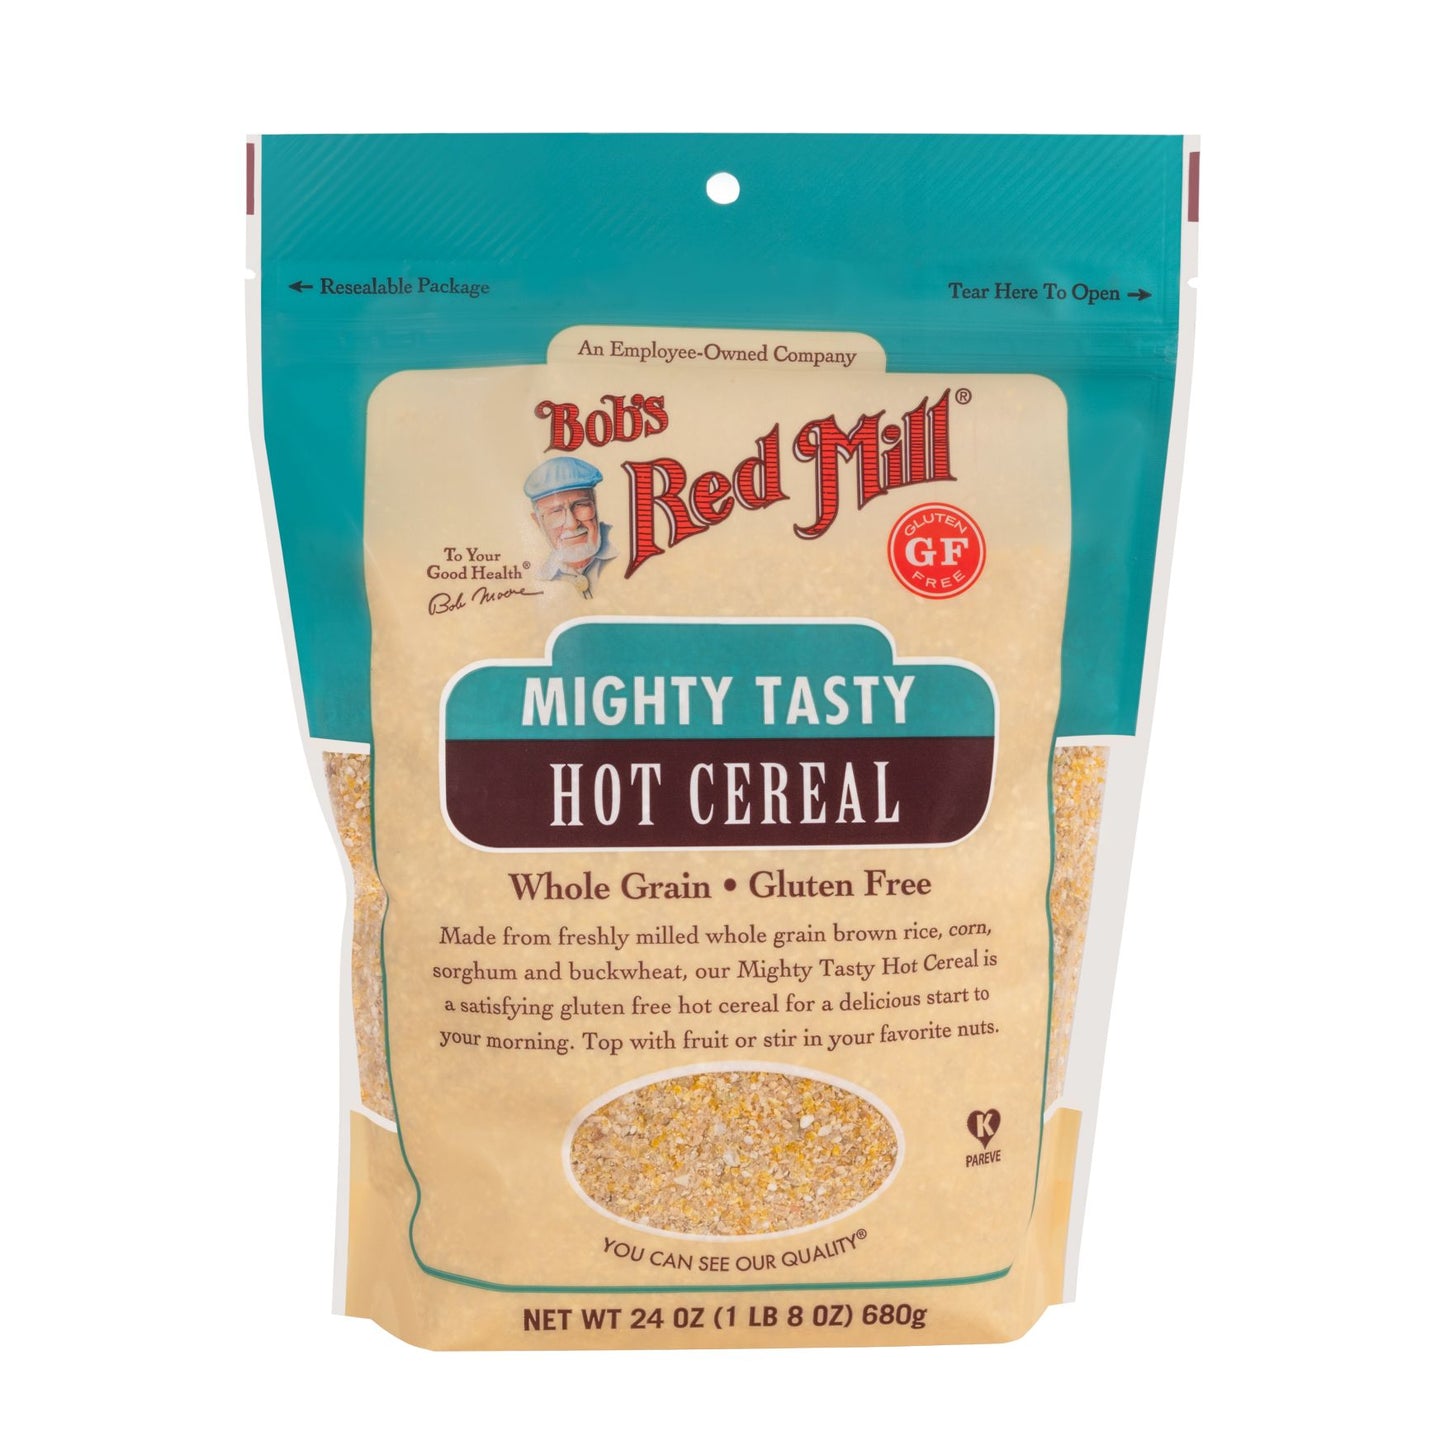 Bob's Red Mill Mighty Tasty Hot Cereal 680g, Gluten Free